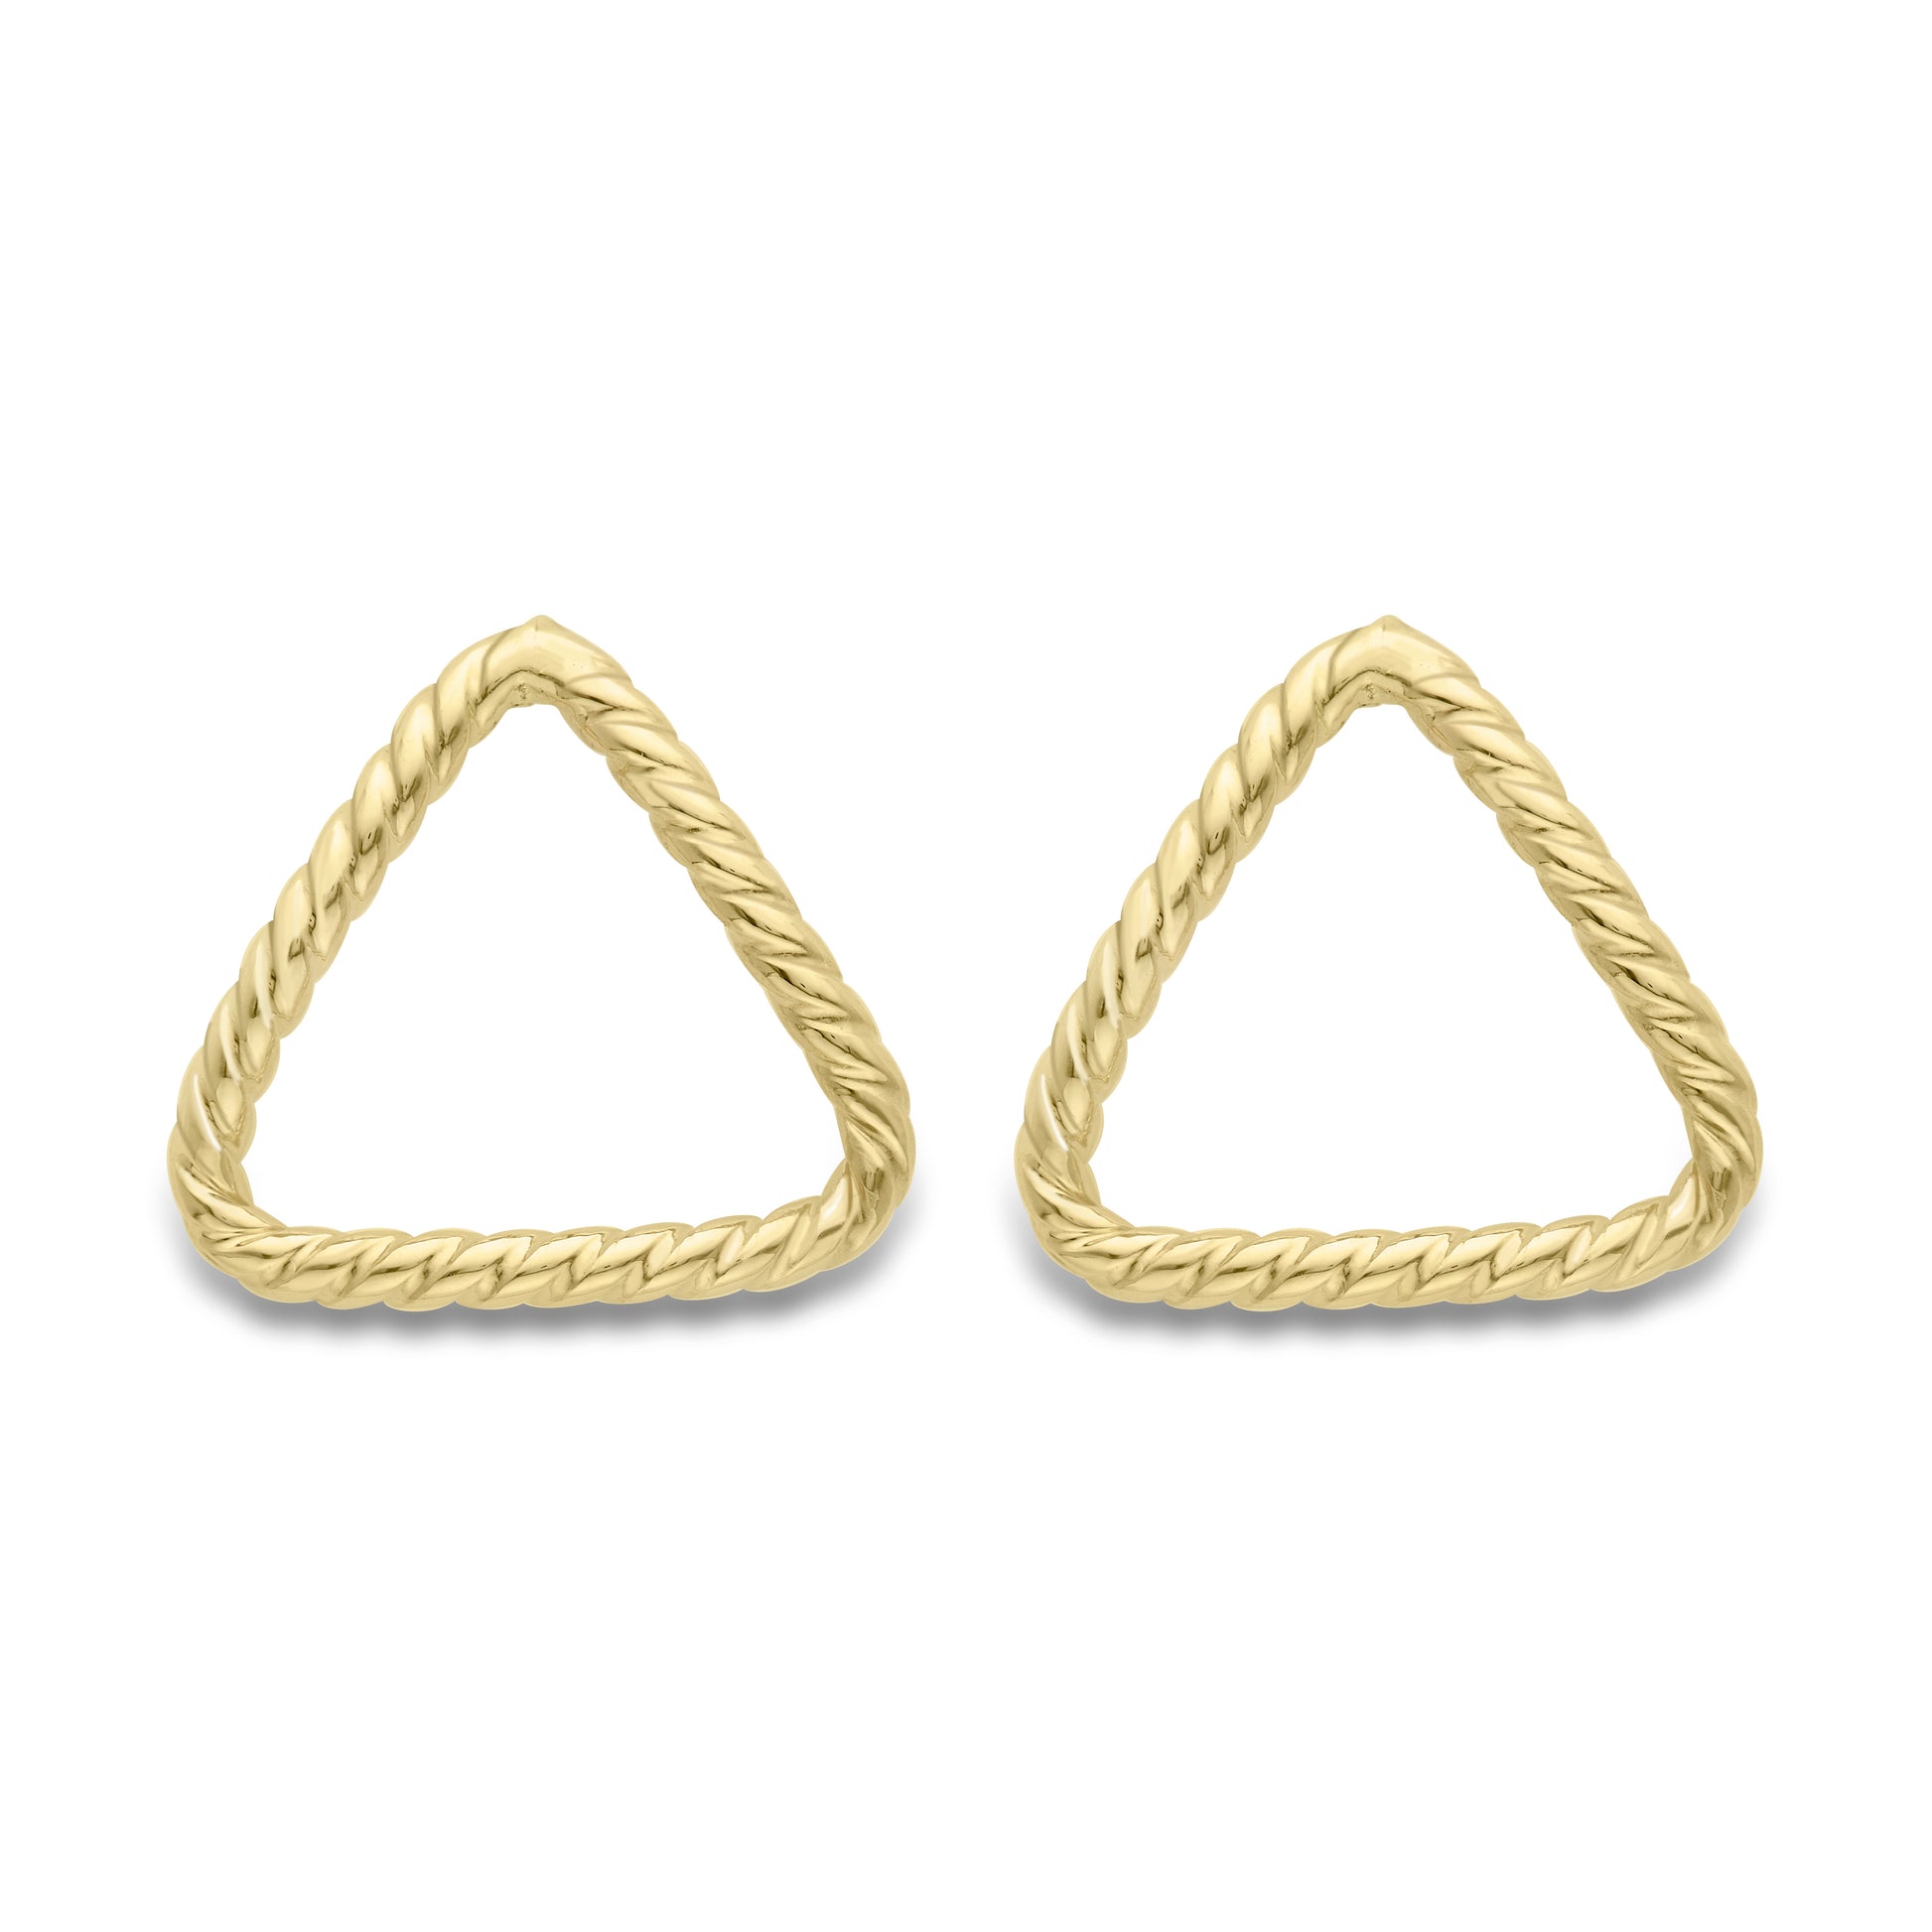 9ct Gold  Rope Twist Equilateral Triangle Stud Earrings - ERNR02649